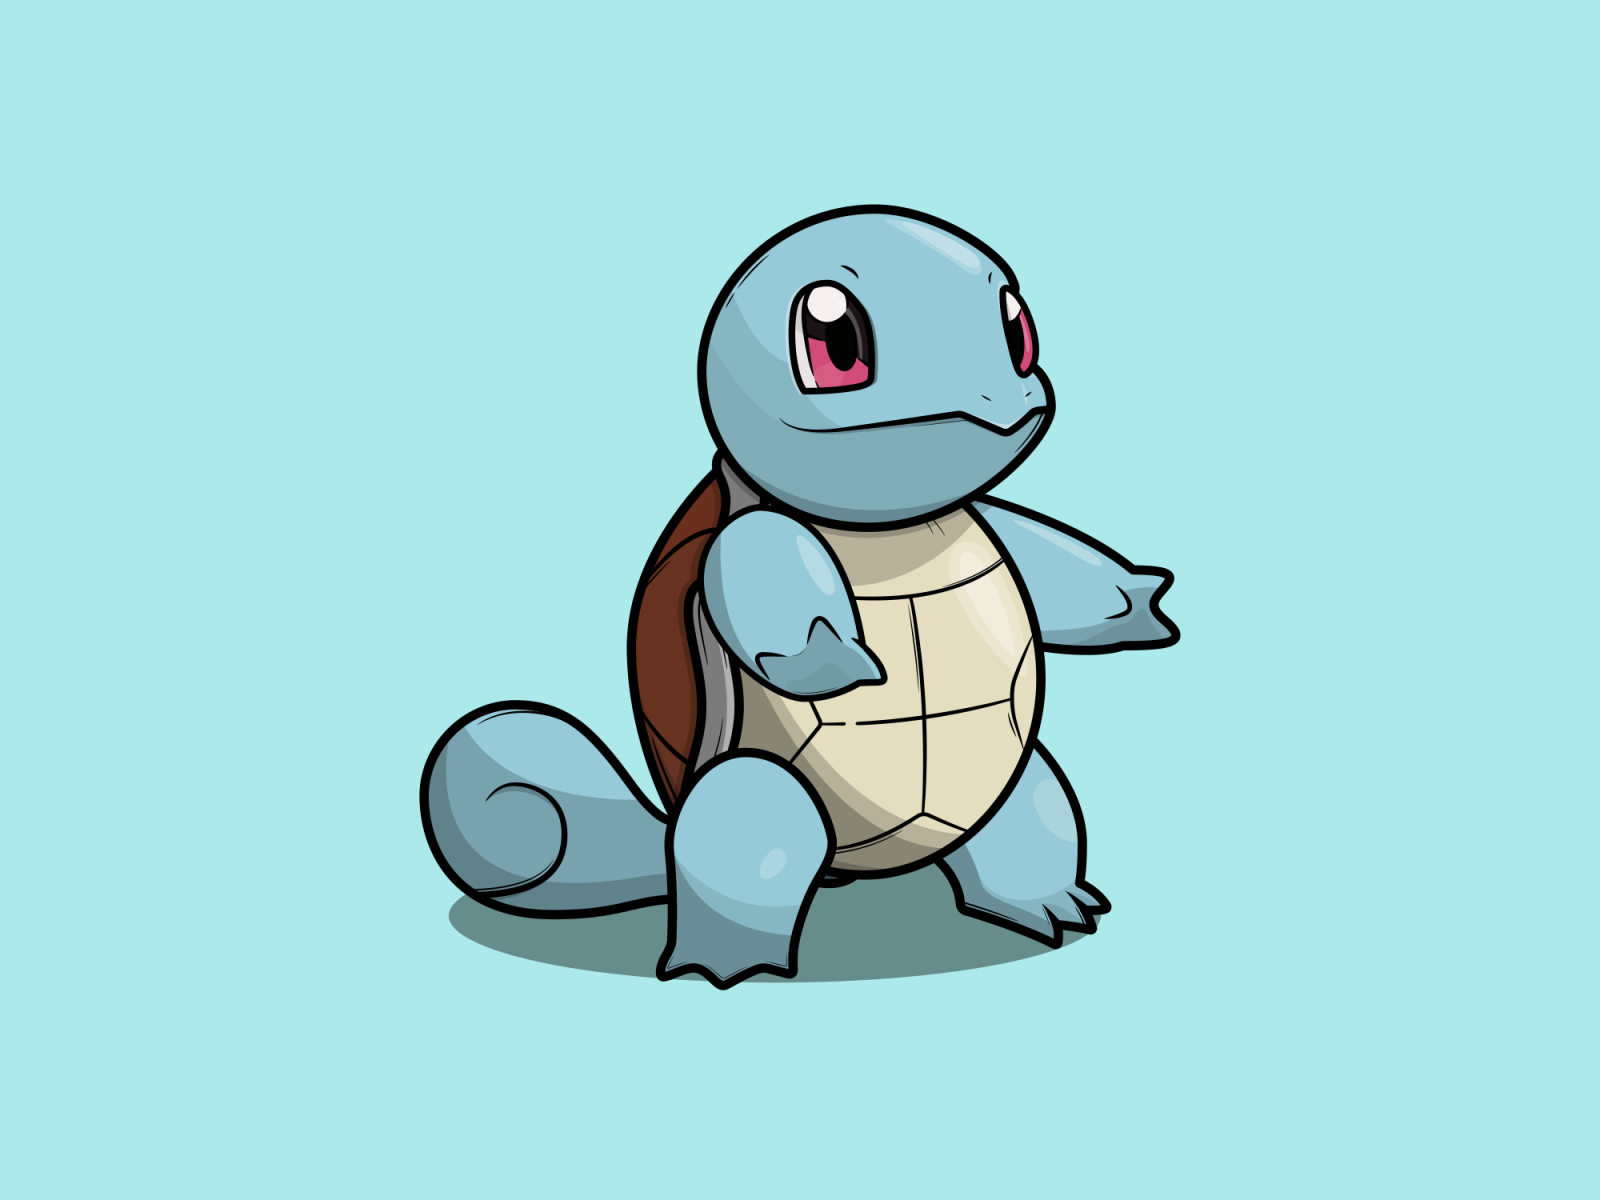 Squirtle designed by Louis Davis. 